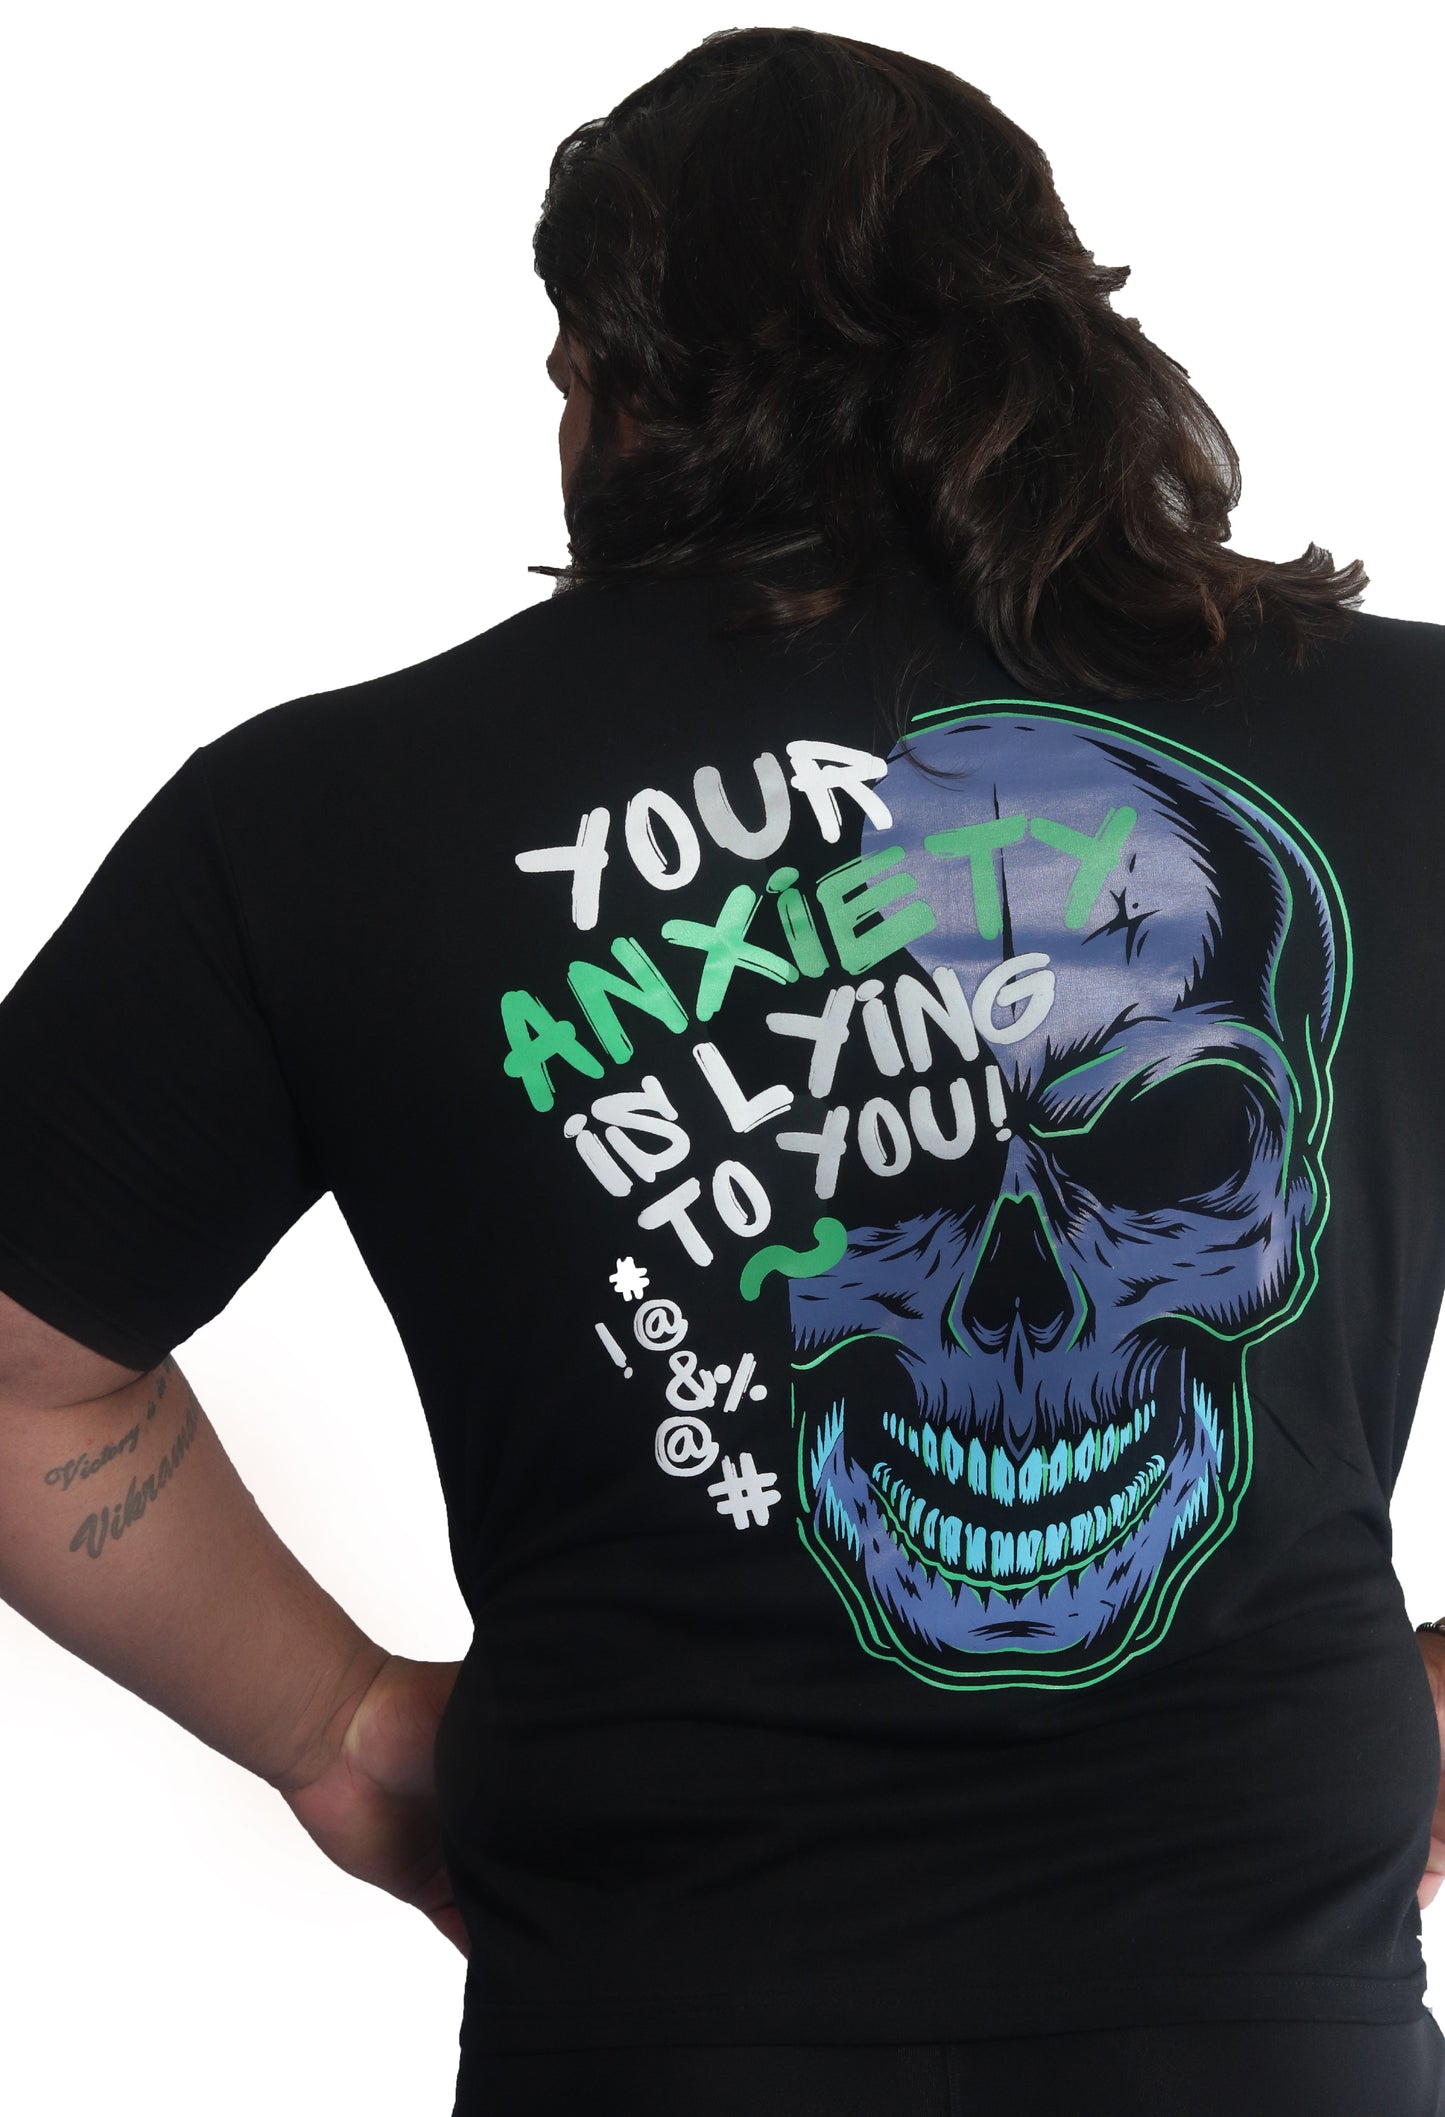 Your anxiety is lying to you - Gym Oversized T Shirt Strong Soul Shirts & Tops